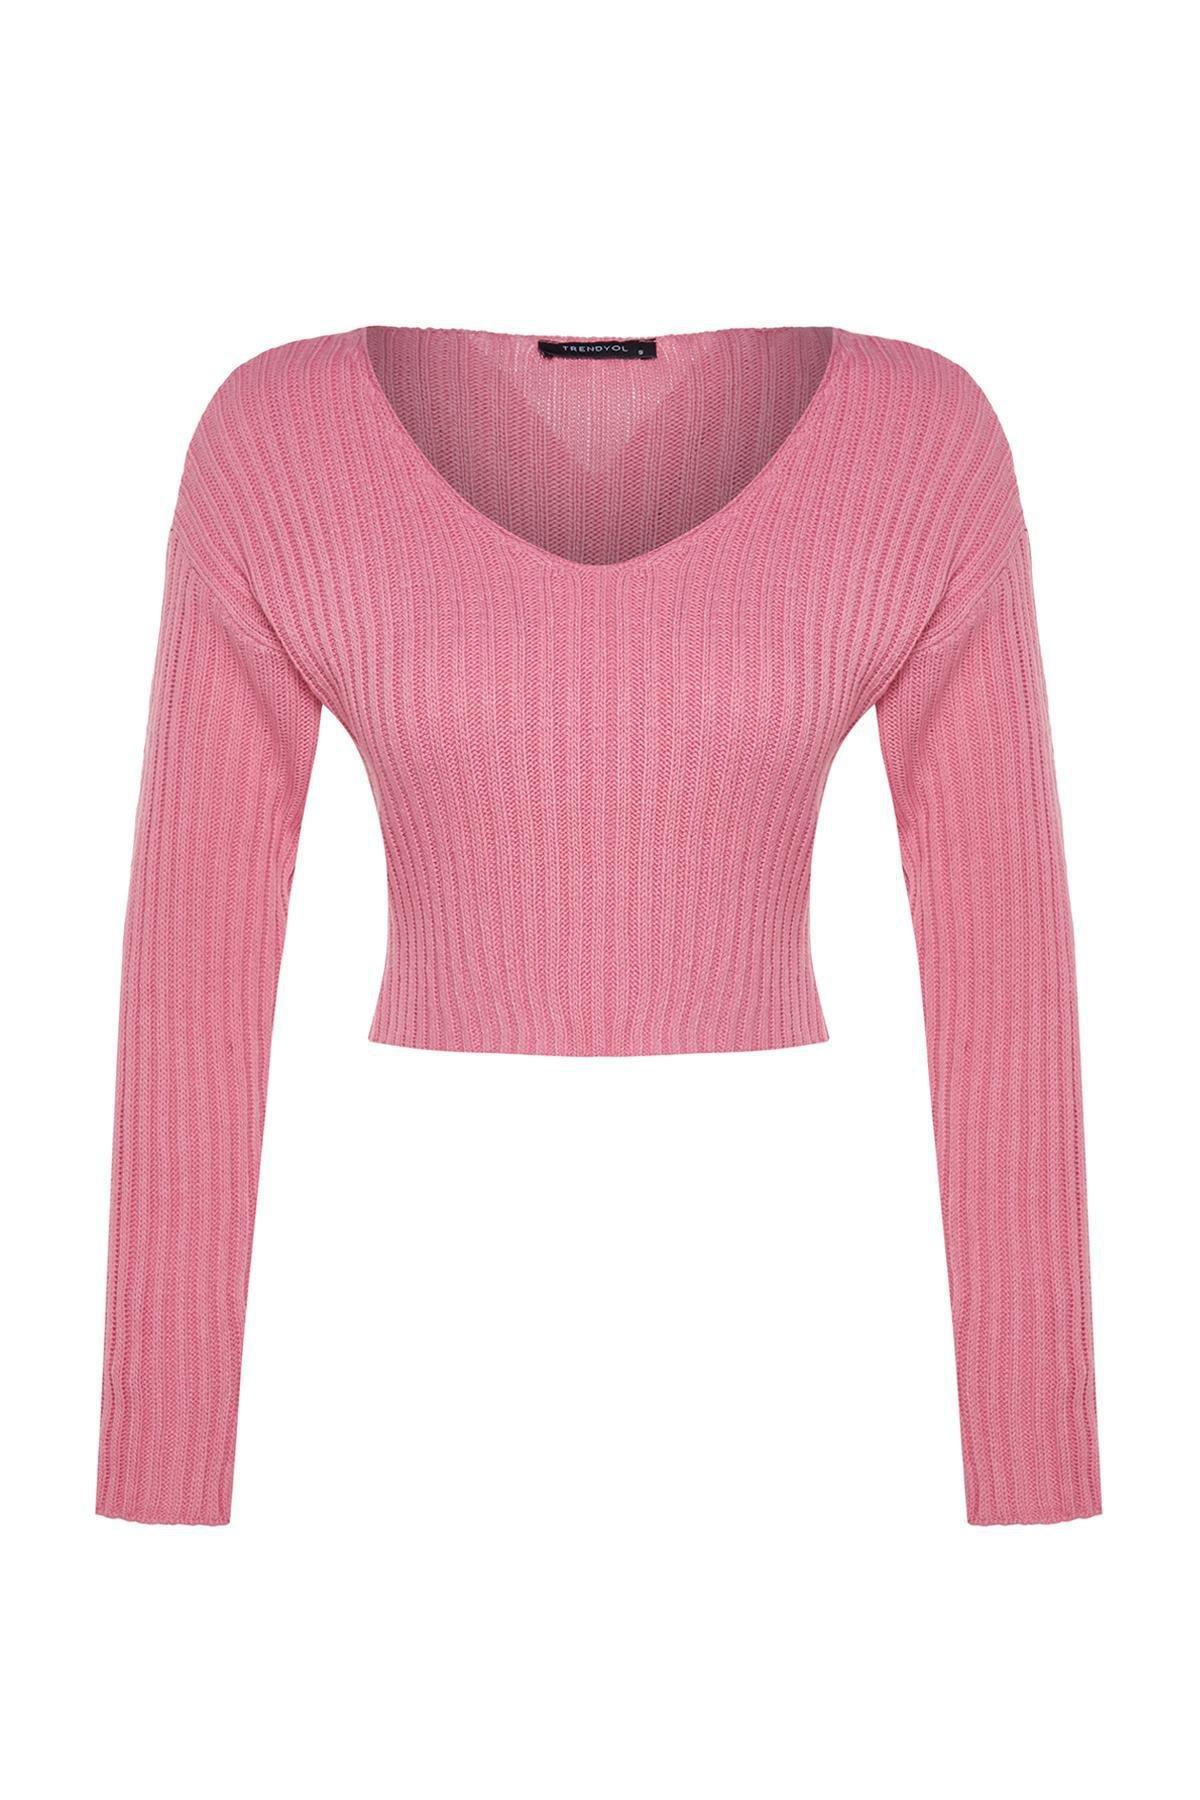 Trendyol - Pink V-Neck Cropped Knitted Sweater